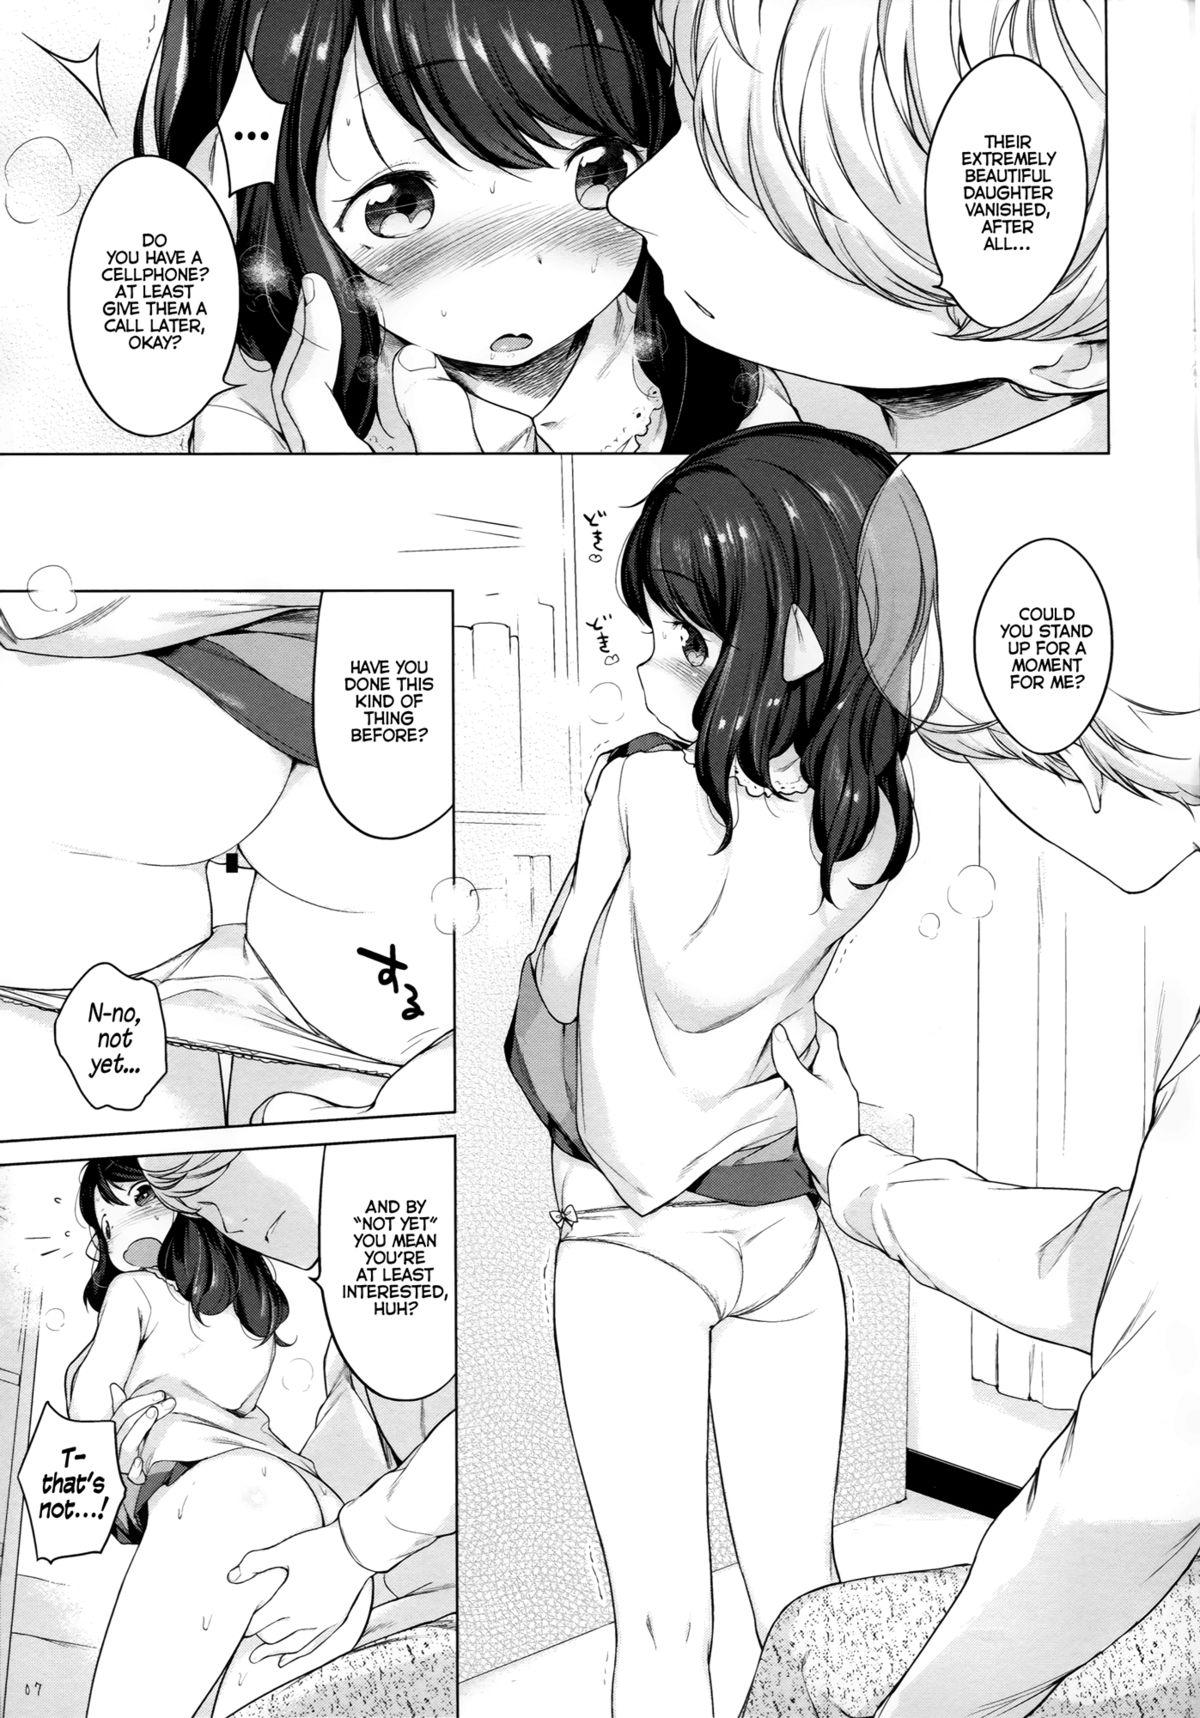 Caught Nanimo Kikazu ni Tometekudasai. | Please Let Me Stay With You, No Questions Asked. Shemales - Page 6